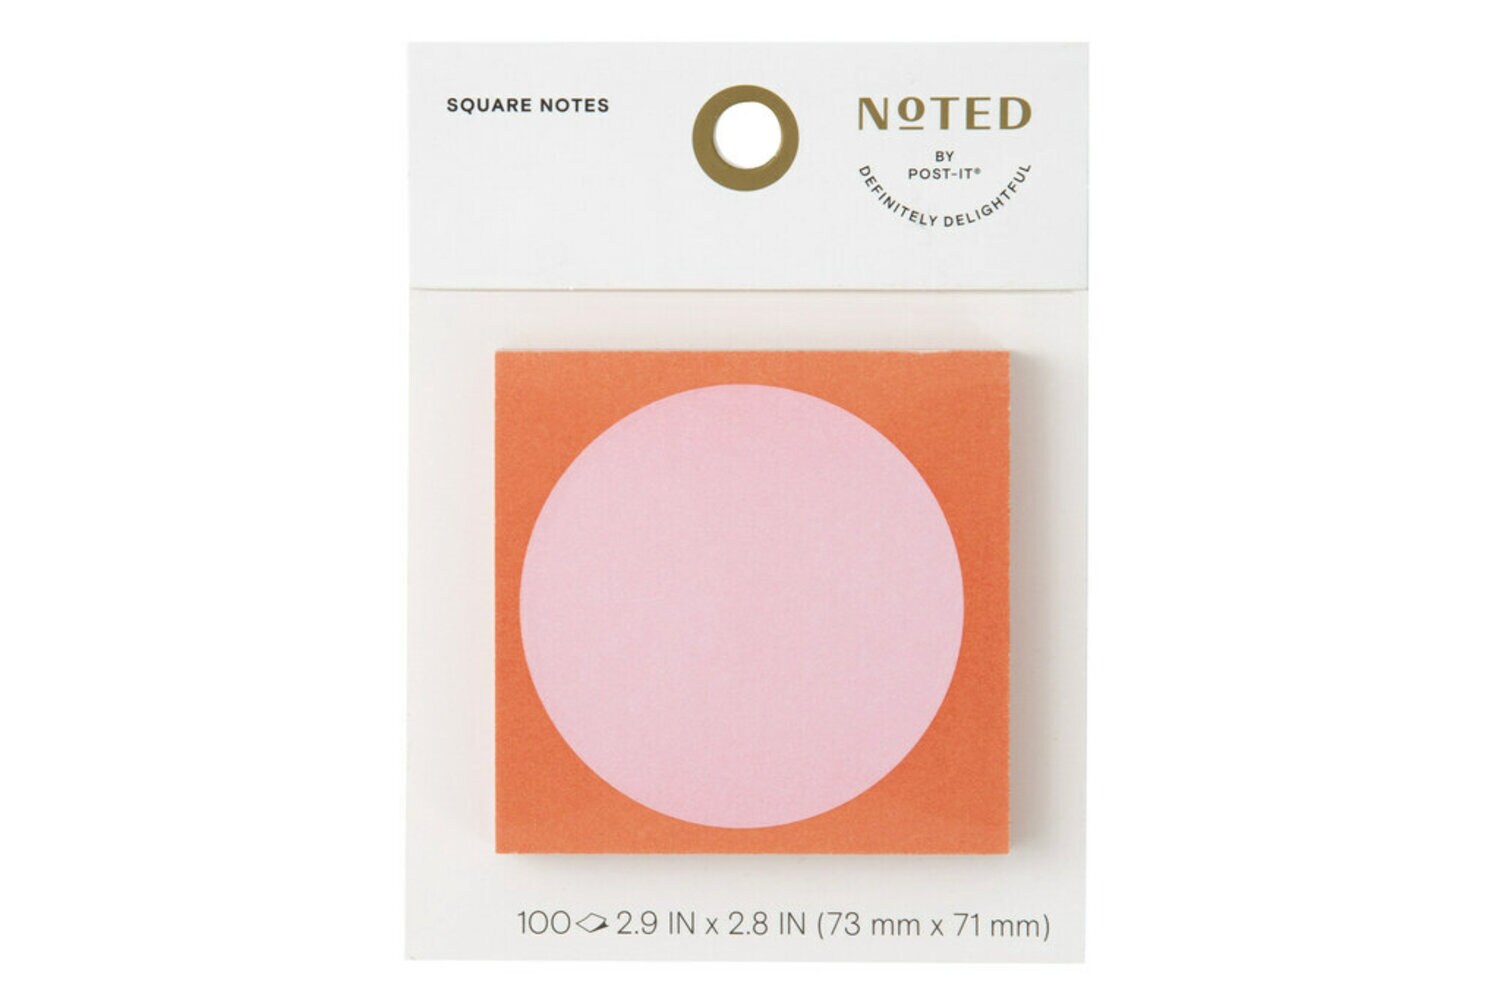 7100275594 - Post-it Square Notes NTD6-33-2, 2.9 in x 2.8 in (73 mm x 71 mm)